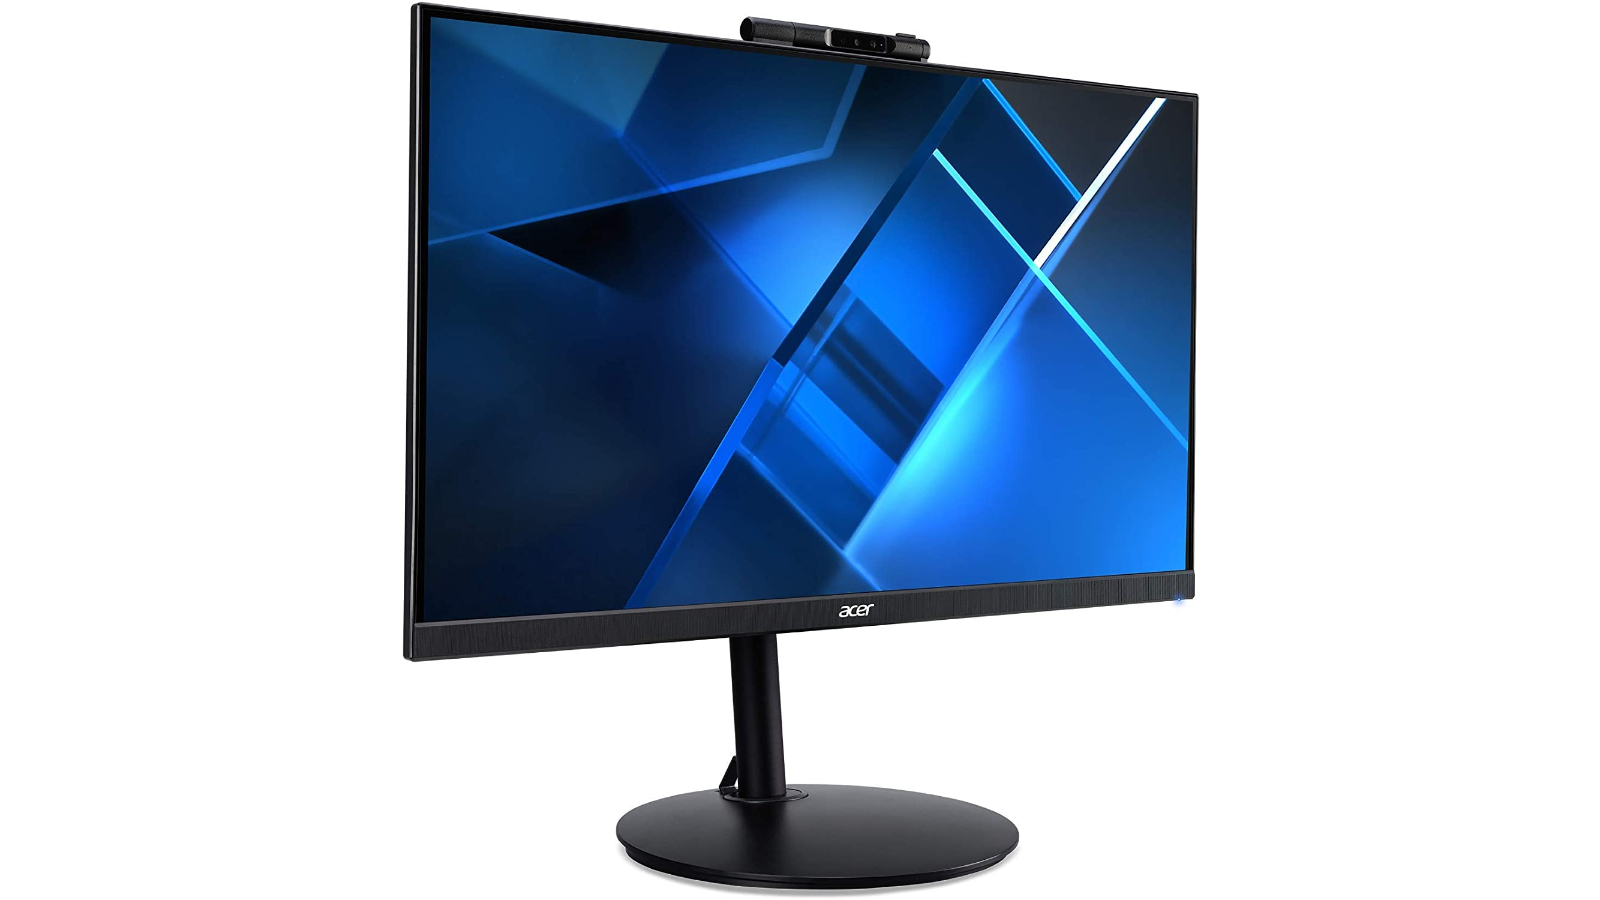 Best monitor with webcam: Acer CB272